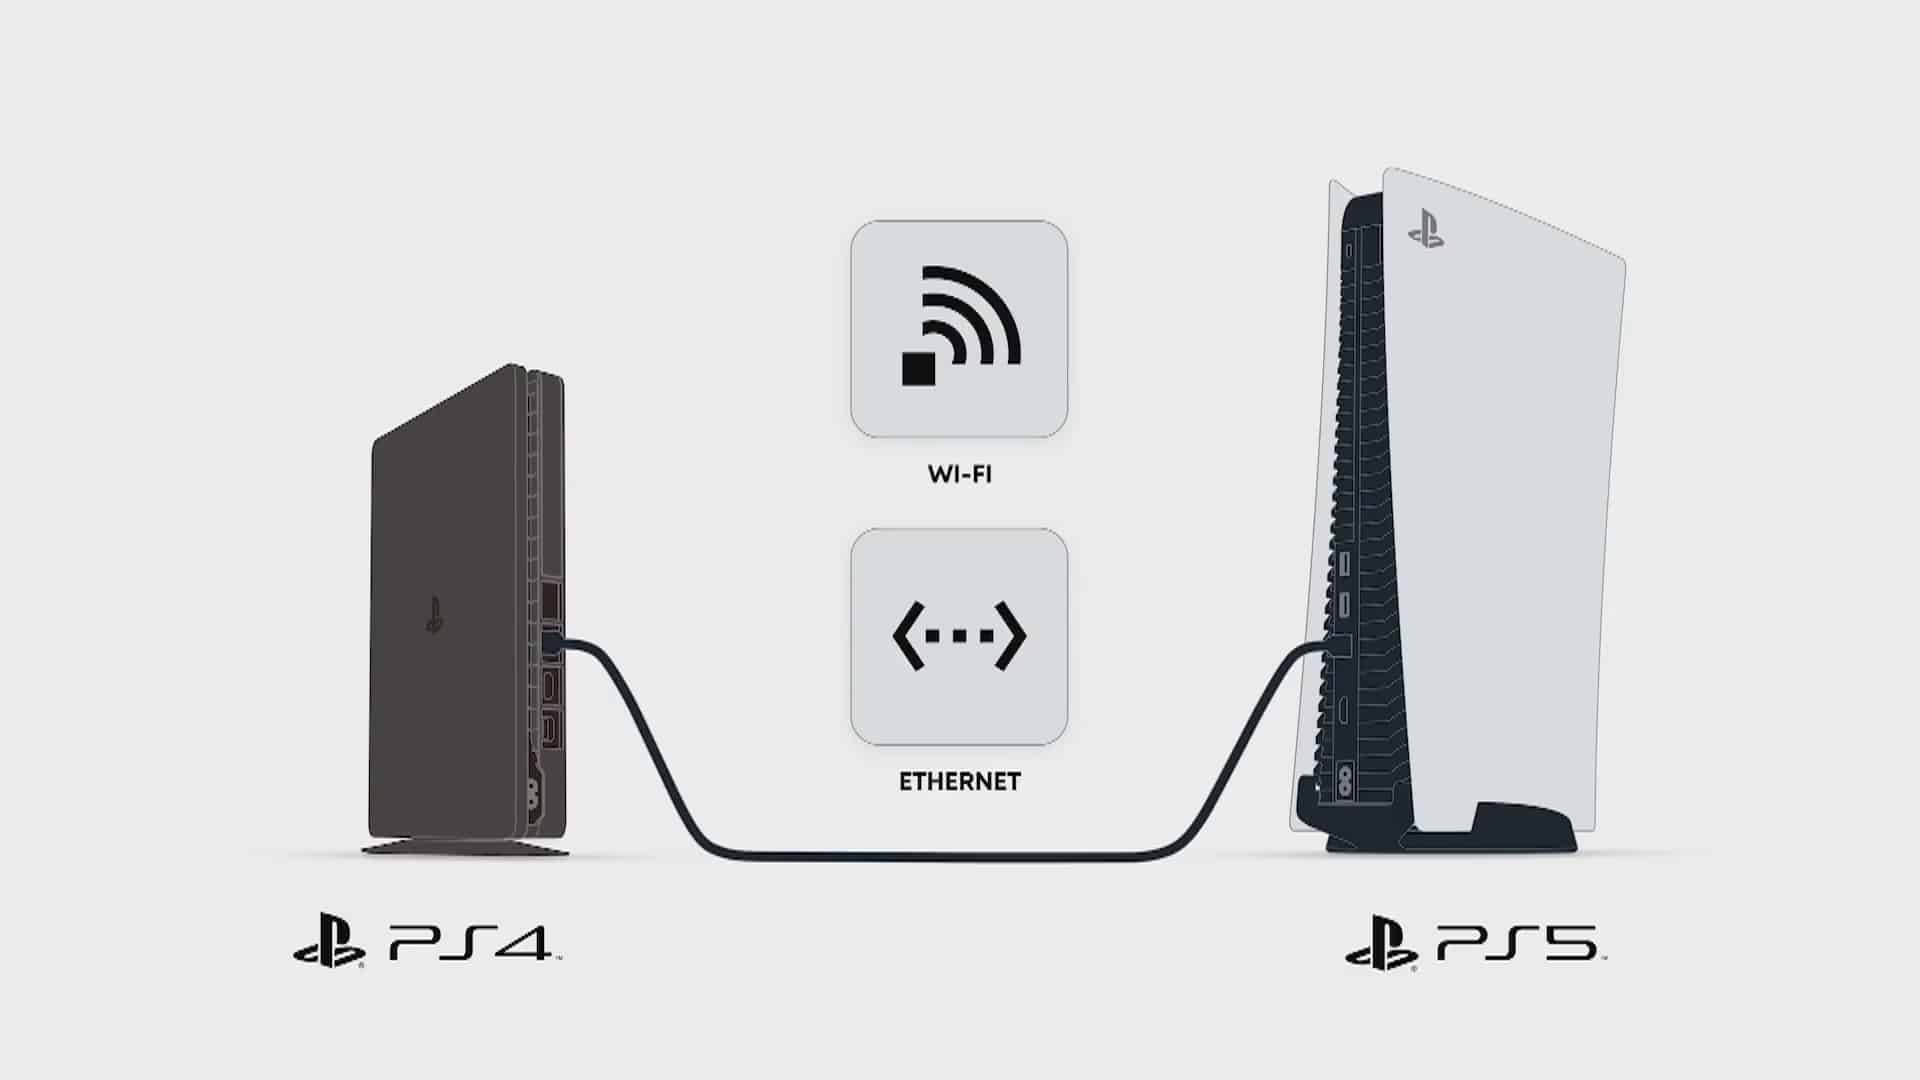 Copy Games From Ps4 To External Hard Drive